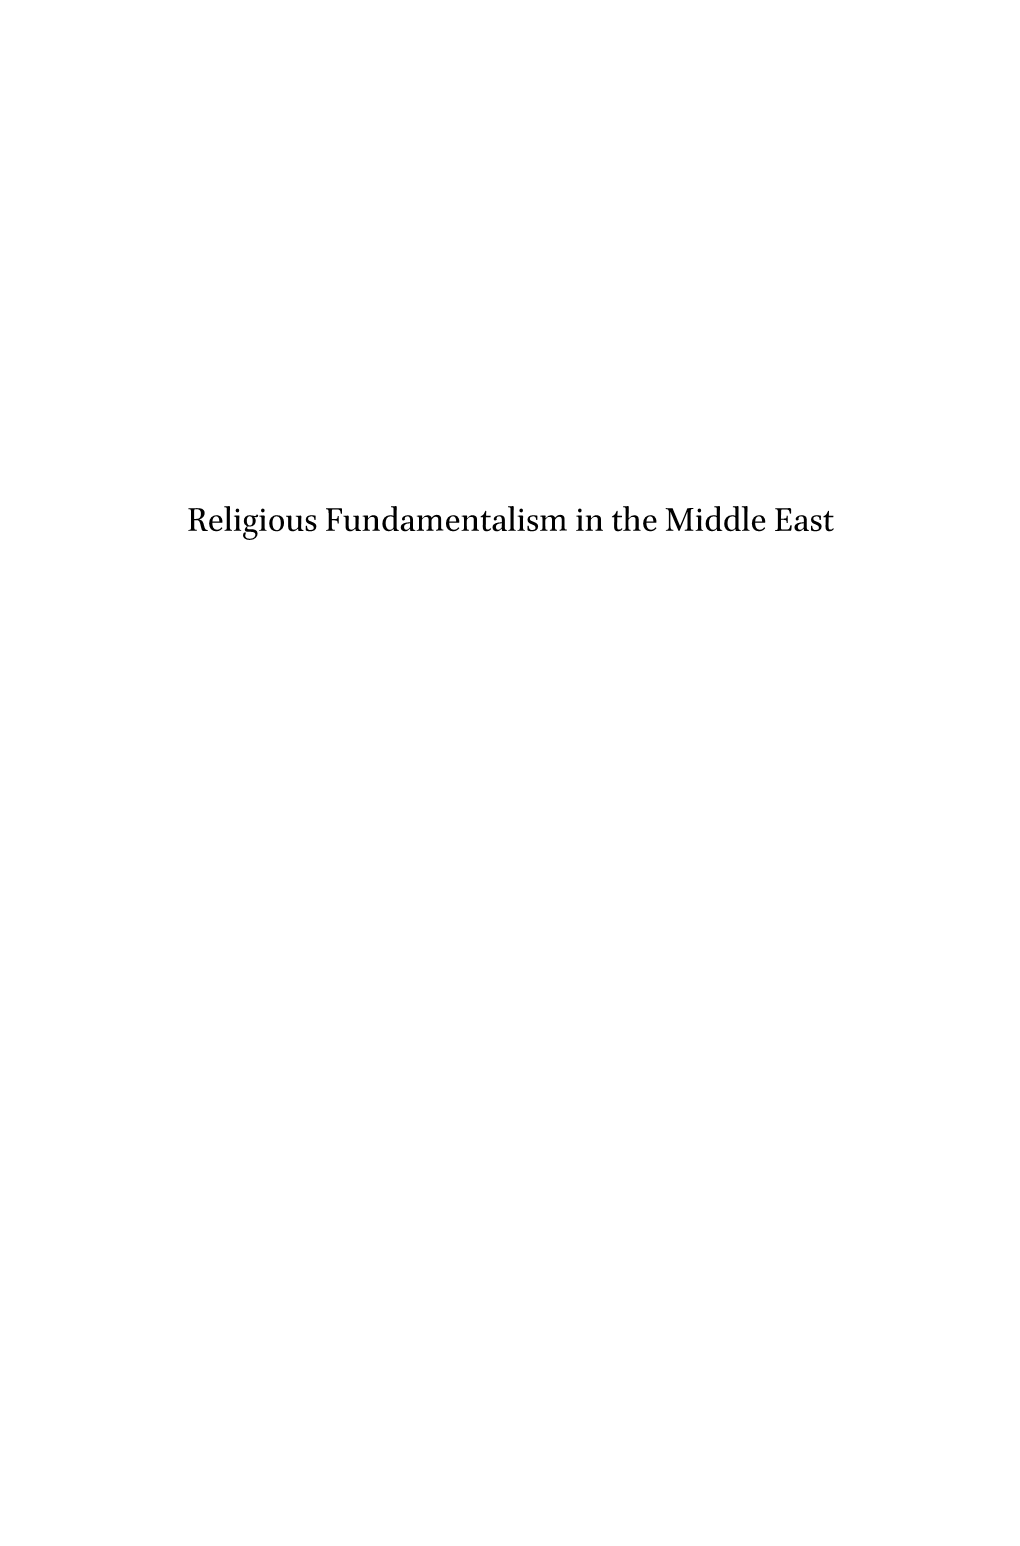 Religious Fundamentalism in the Middle East Studies in Critical Social Sciences Series Editor David Fasenfest Wayne State University